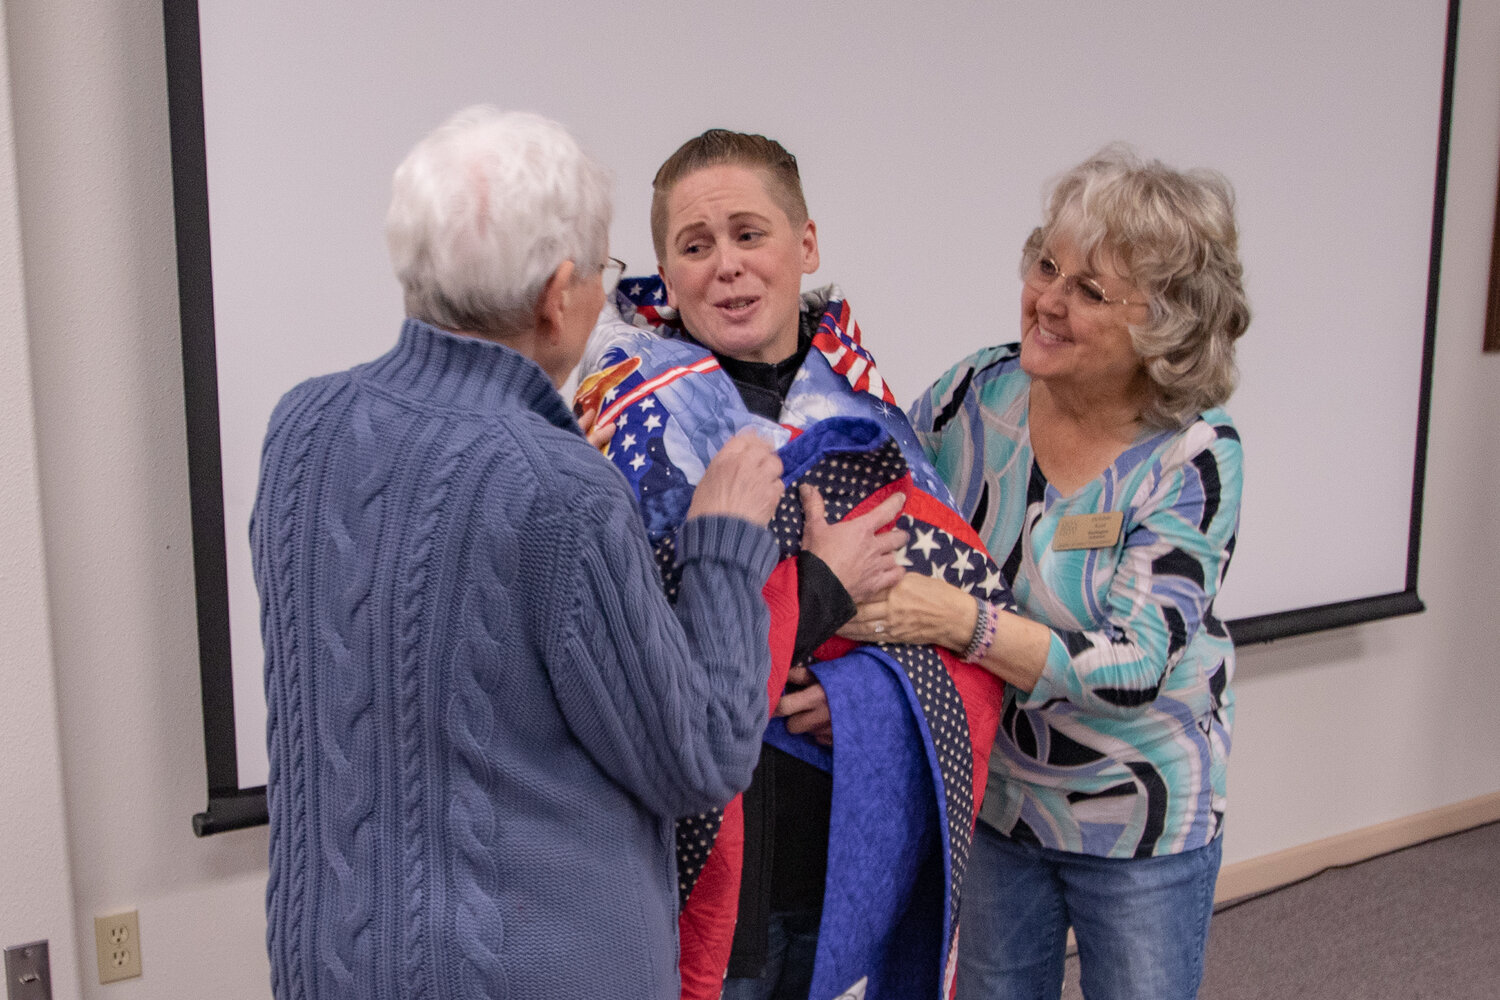 U.S. Army veteran Tabitha Hopp thanks Veterans Memorial Museum Quilts of Valor chapter members after receiving her quilt on Saturday, Nov. 11.